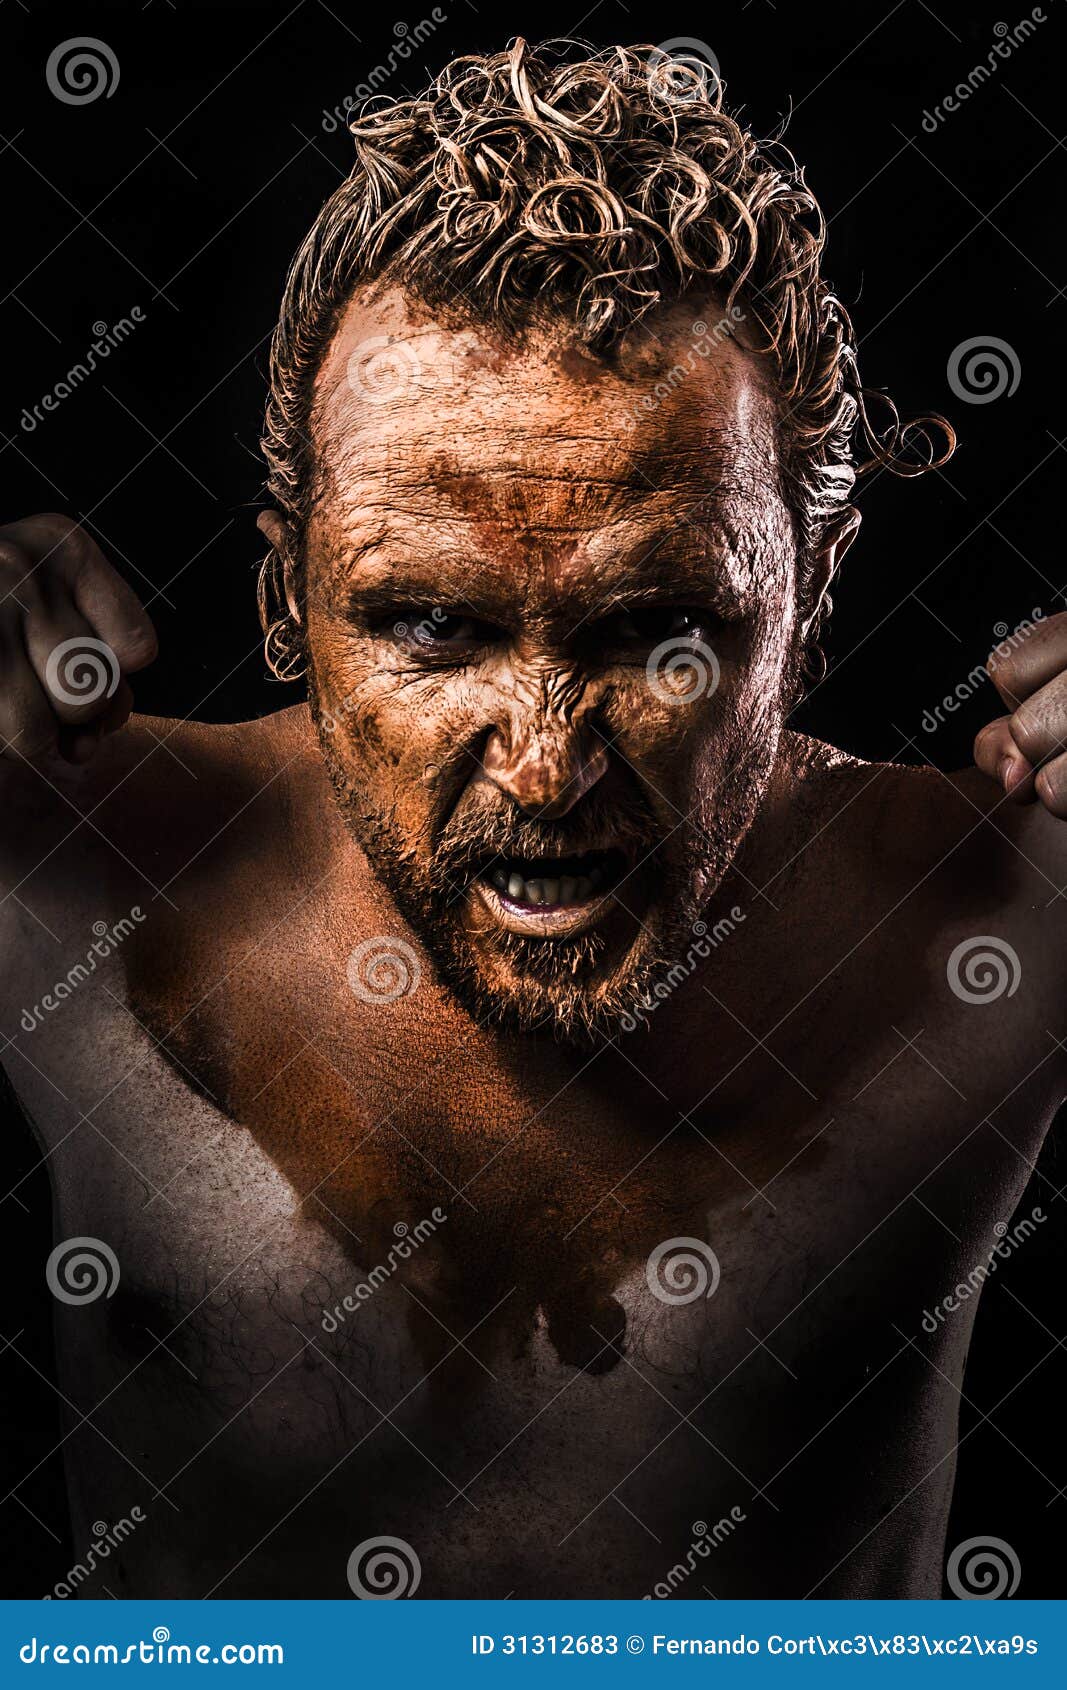 Man Covered In Mud, Naked, In Profile, Dirty Skin Royalty Free Stock Image - Image: 31311546